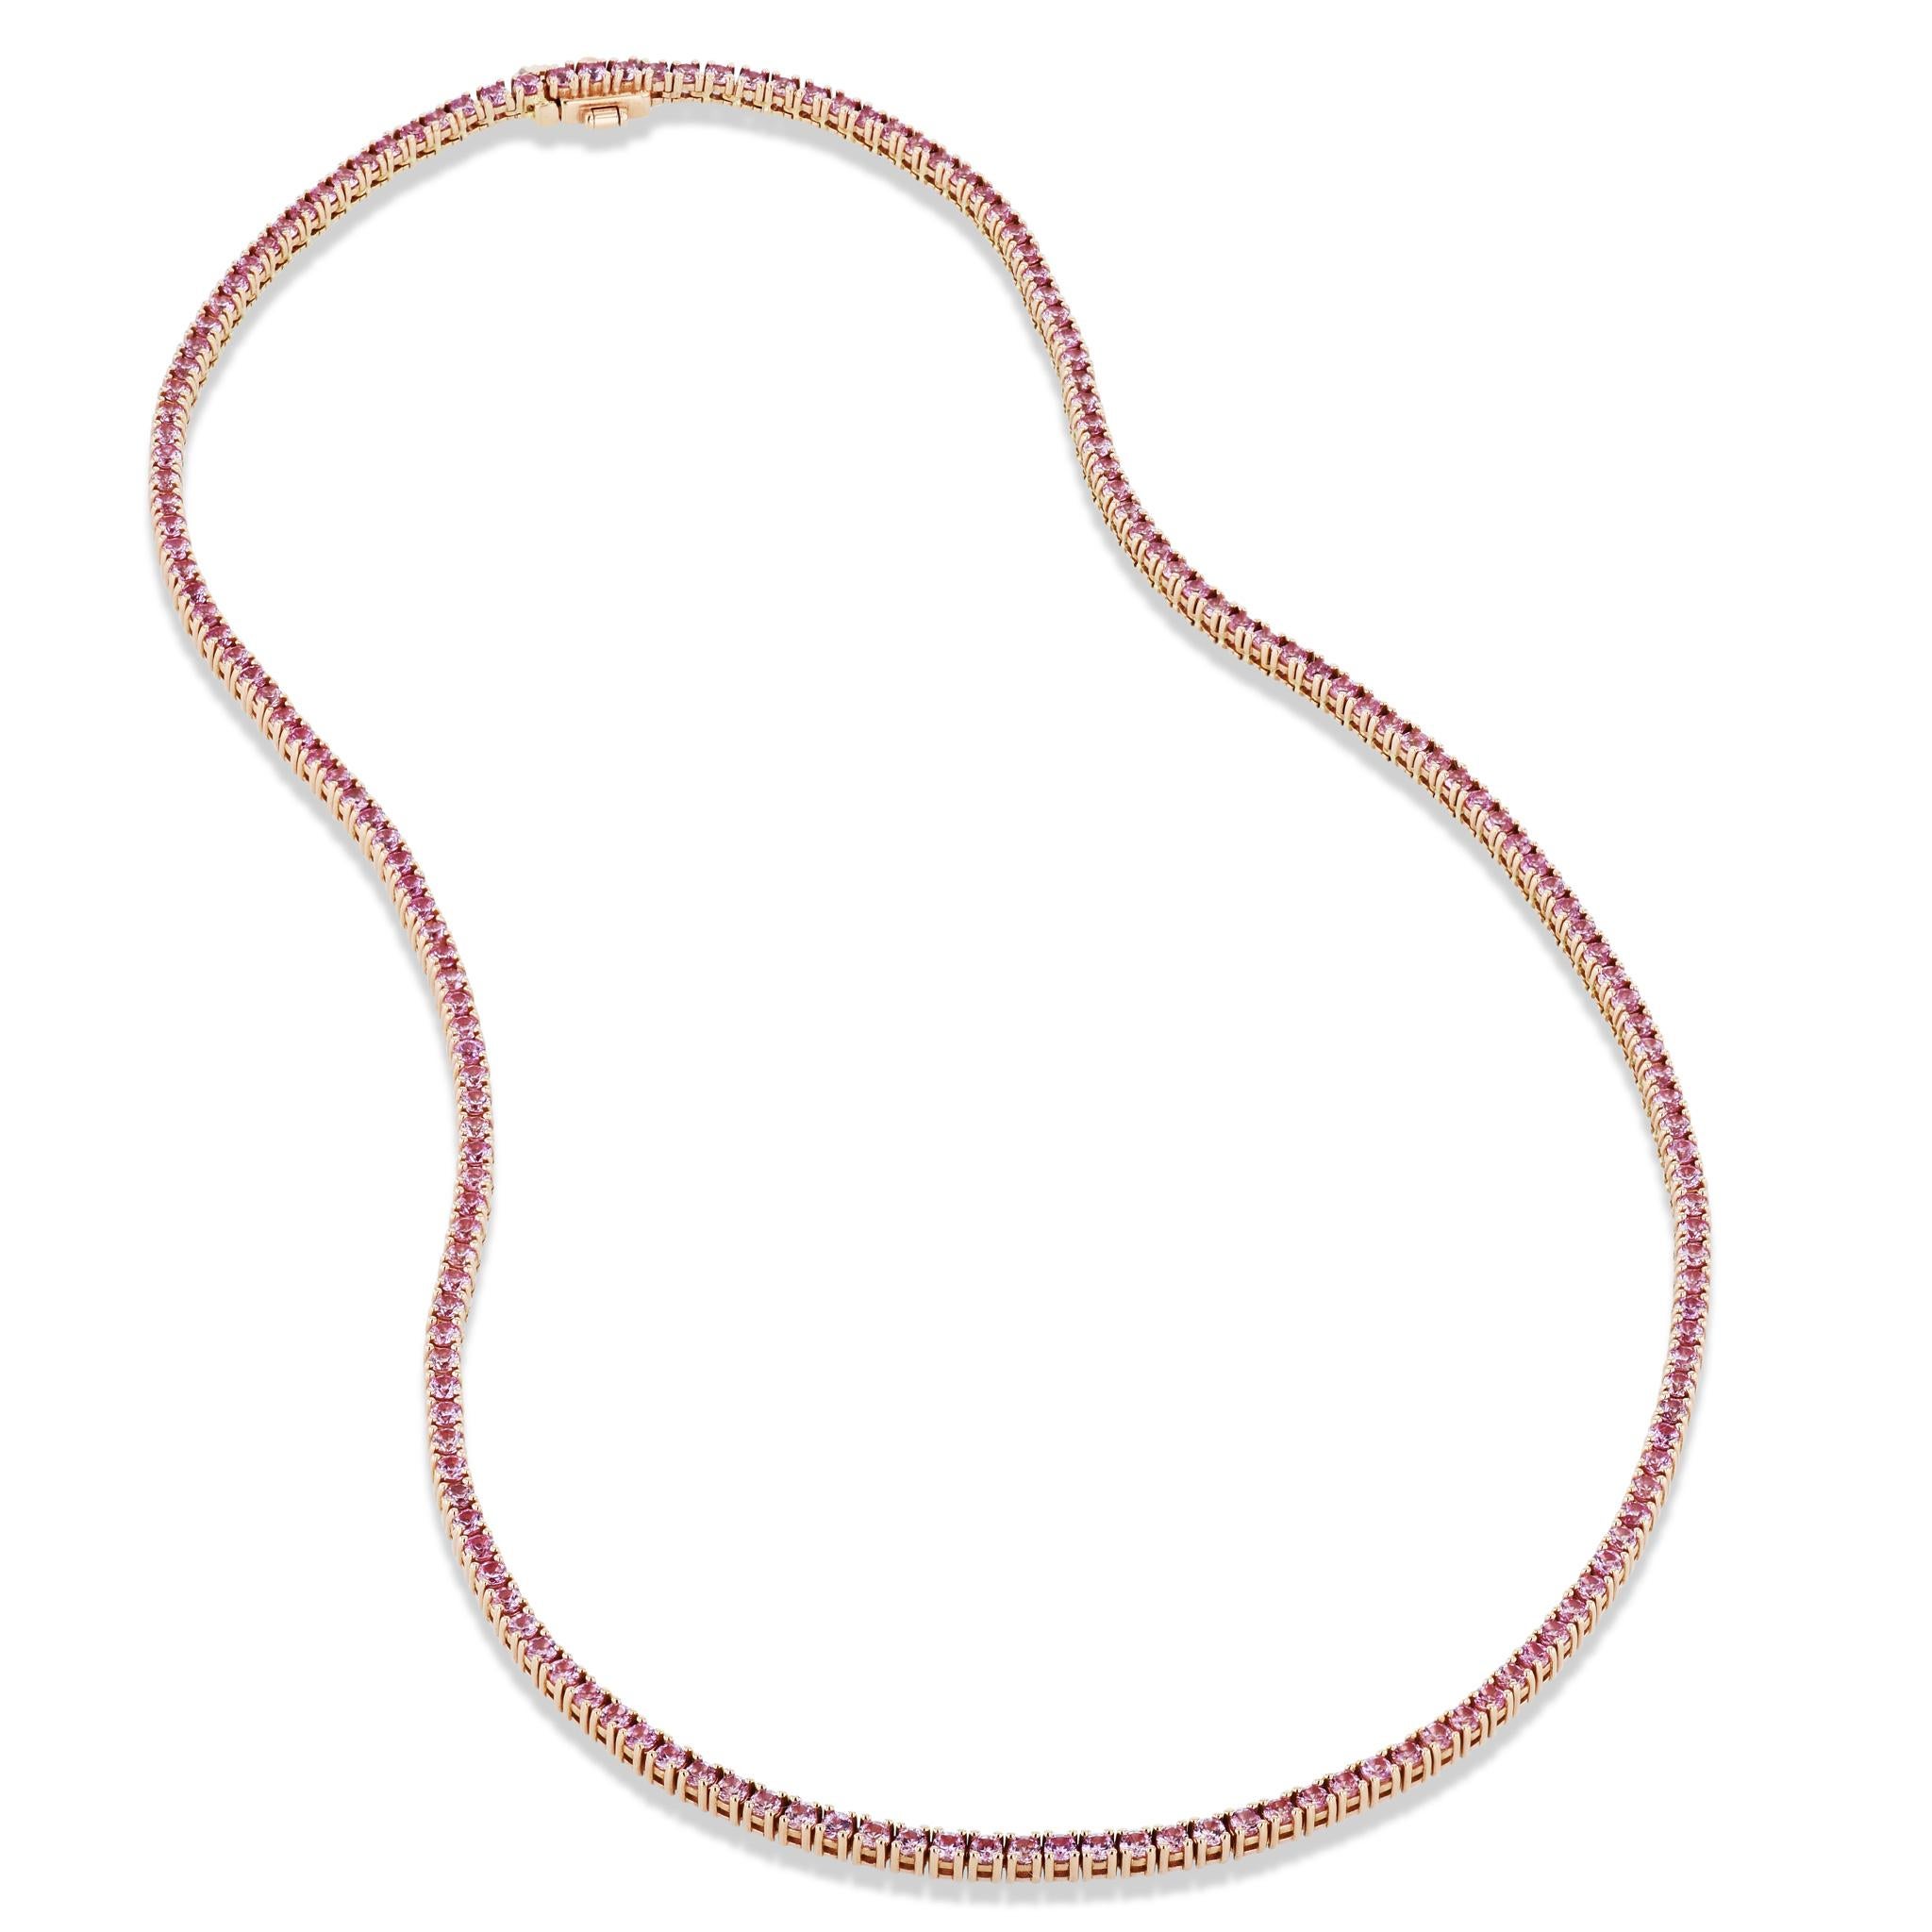 This gorgeous 18 karat rose gold, pink sapphire tennis necklace will take your breath away! 

This sassy tennis necklace features 184 pink sapphires that total 7.58 carats. It measures 17 inches in length. 

This beauty is handmade and one of a